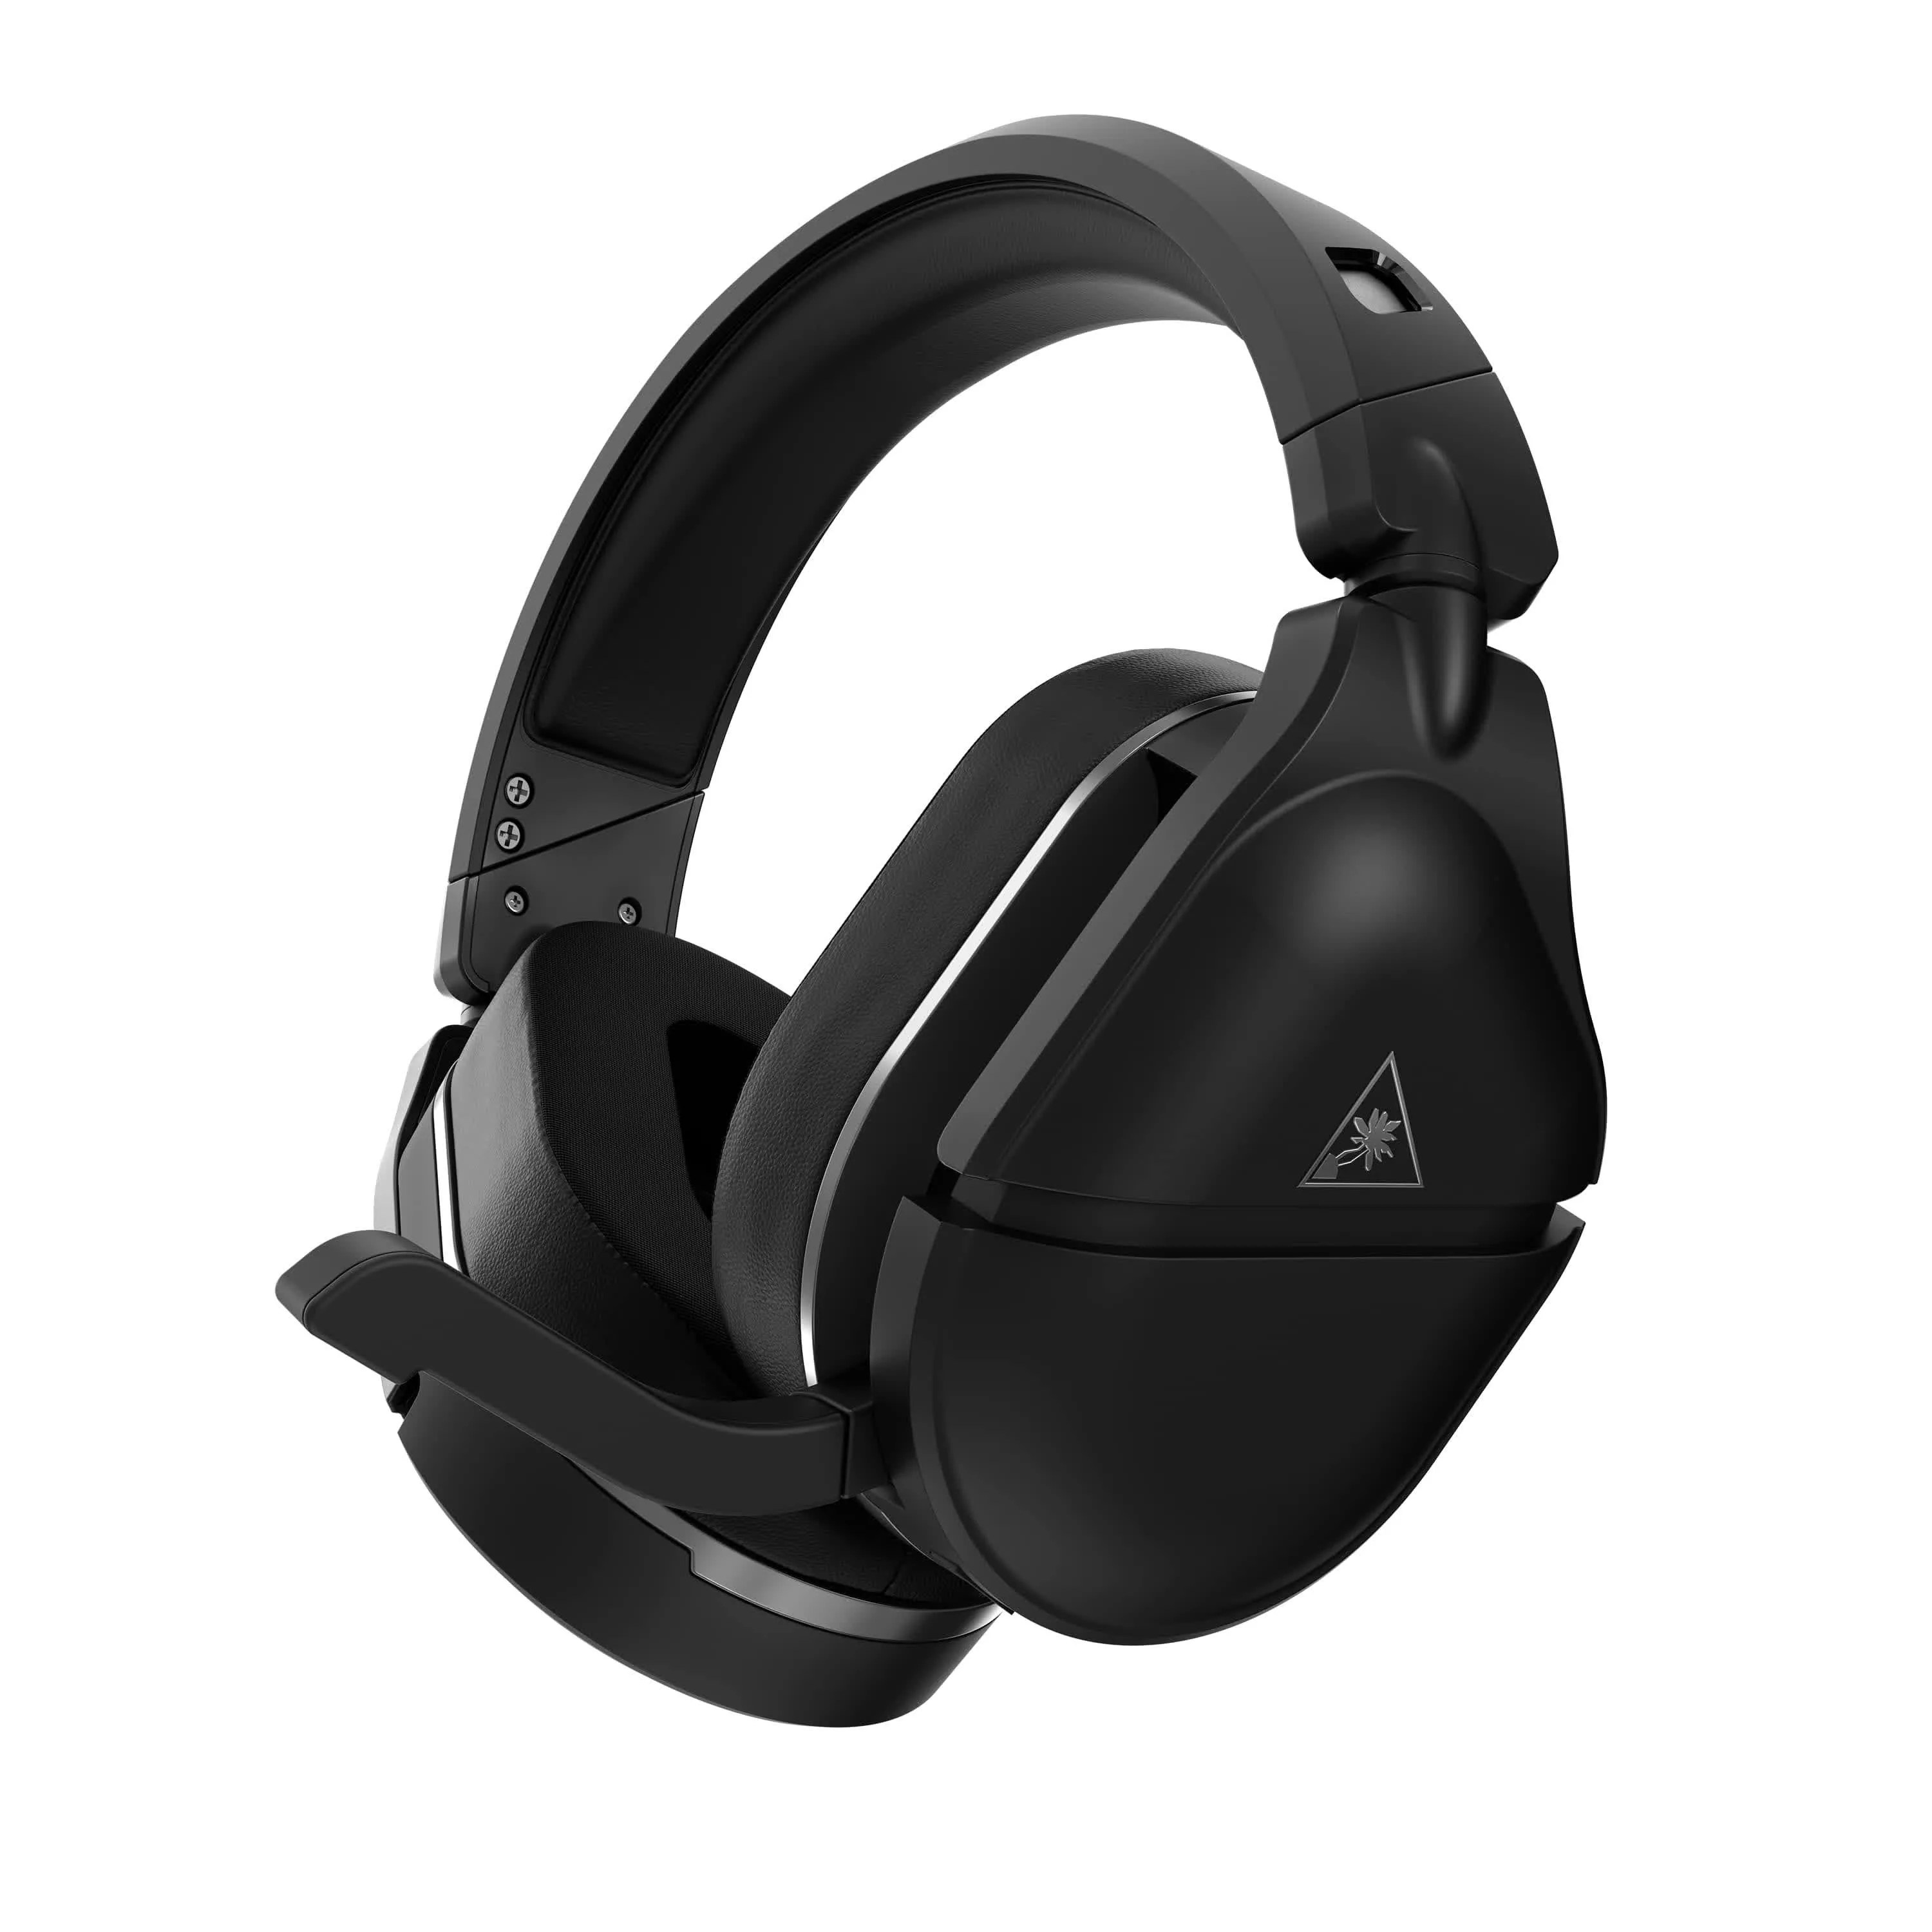 Turtle Beach Stealth 700 Gen 2 Reviews, Pros and Cons TechSpot